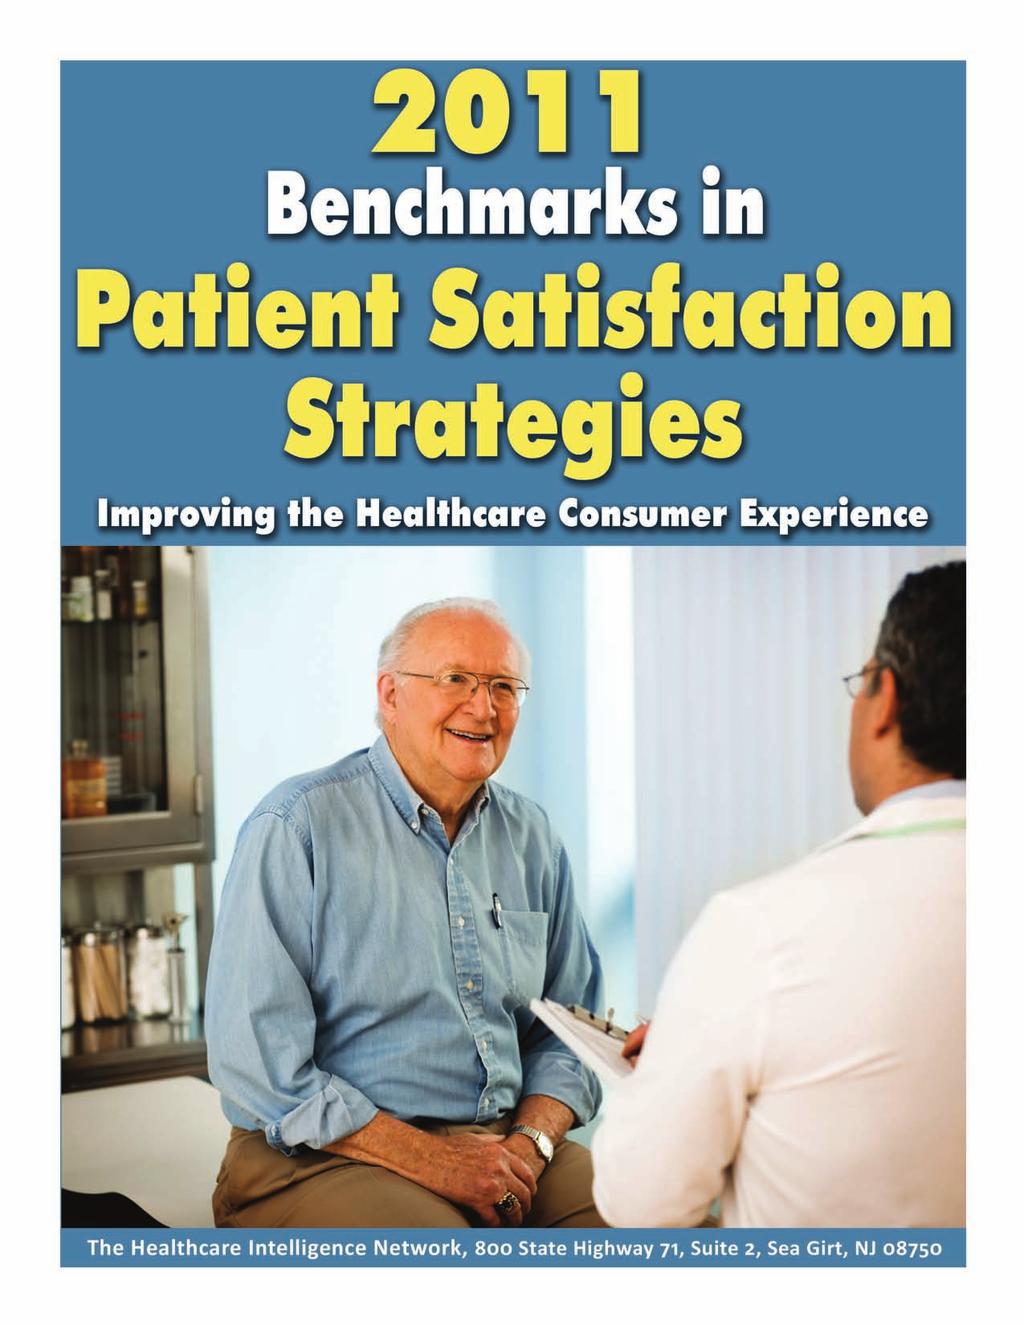 Note: This is an authorized excerpt from 2011 Benchmarks in Patient Satisfaction Strategies: Improving the Healthcare Consumer Experience.